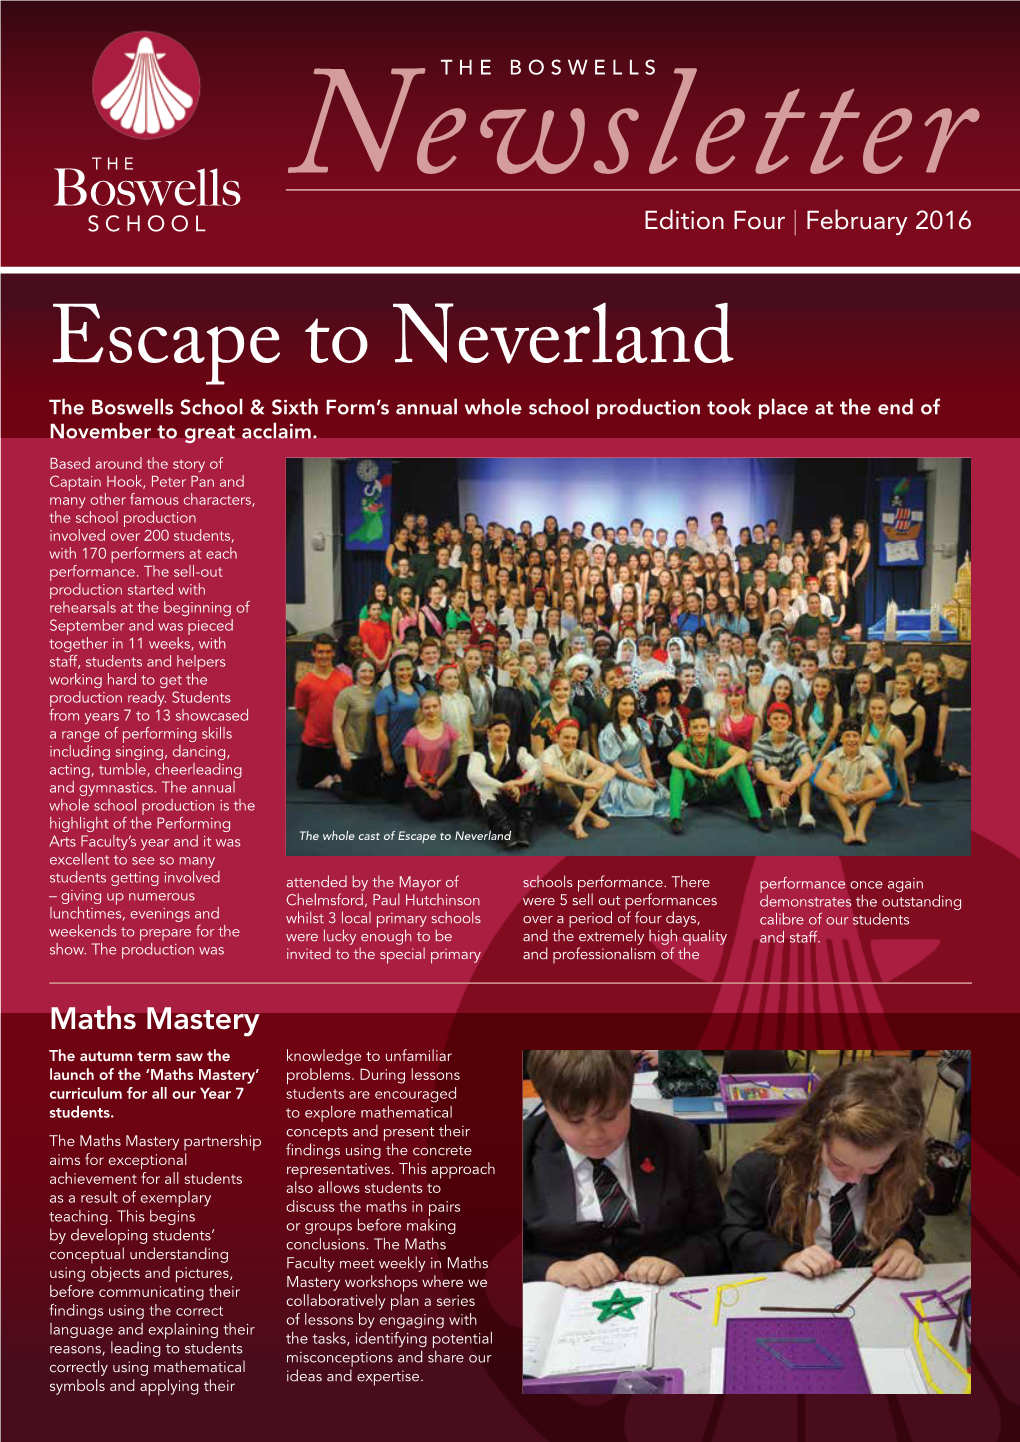 Escape to Neverland Excellent to See So Many Students Getting Involved Attended by the Mayor of Schools Performance